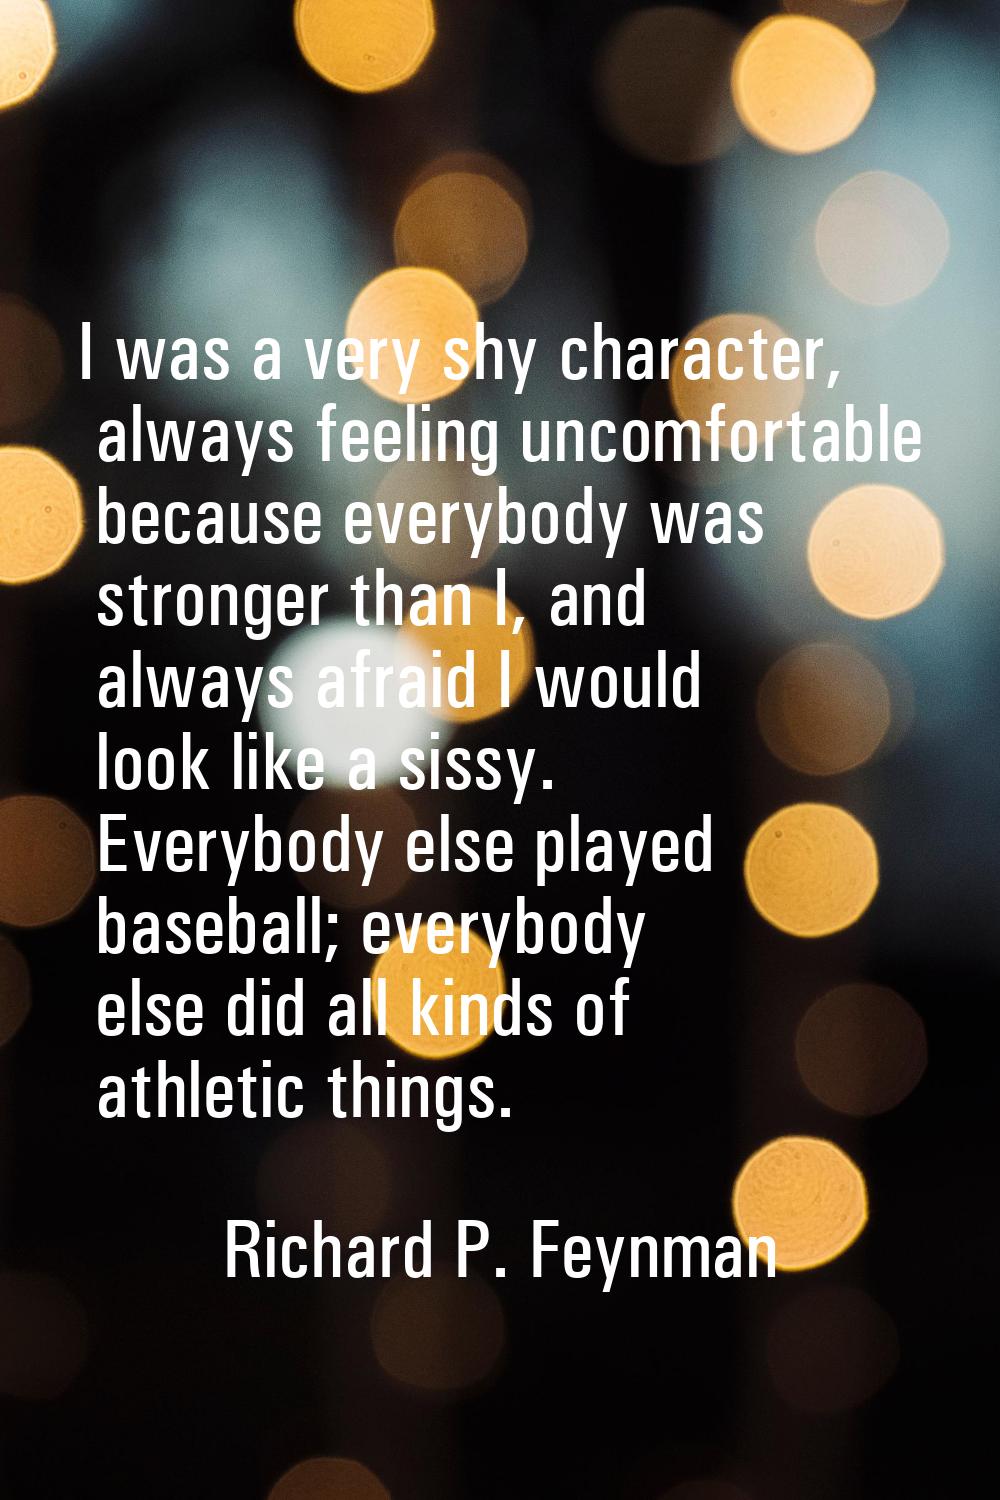 I was a very shy character, always feeling uncomfortable because everybody was stronger than I, and